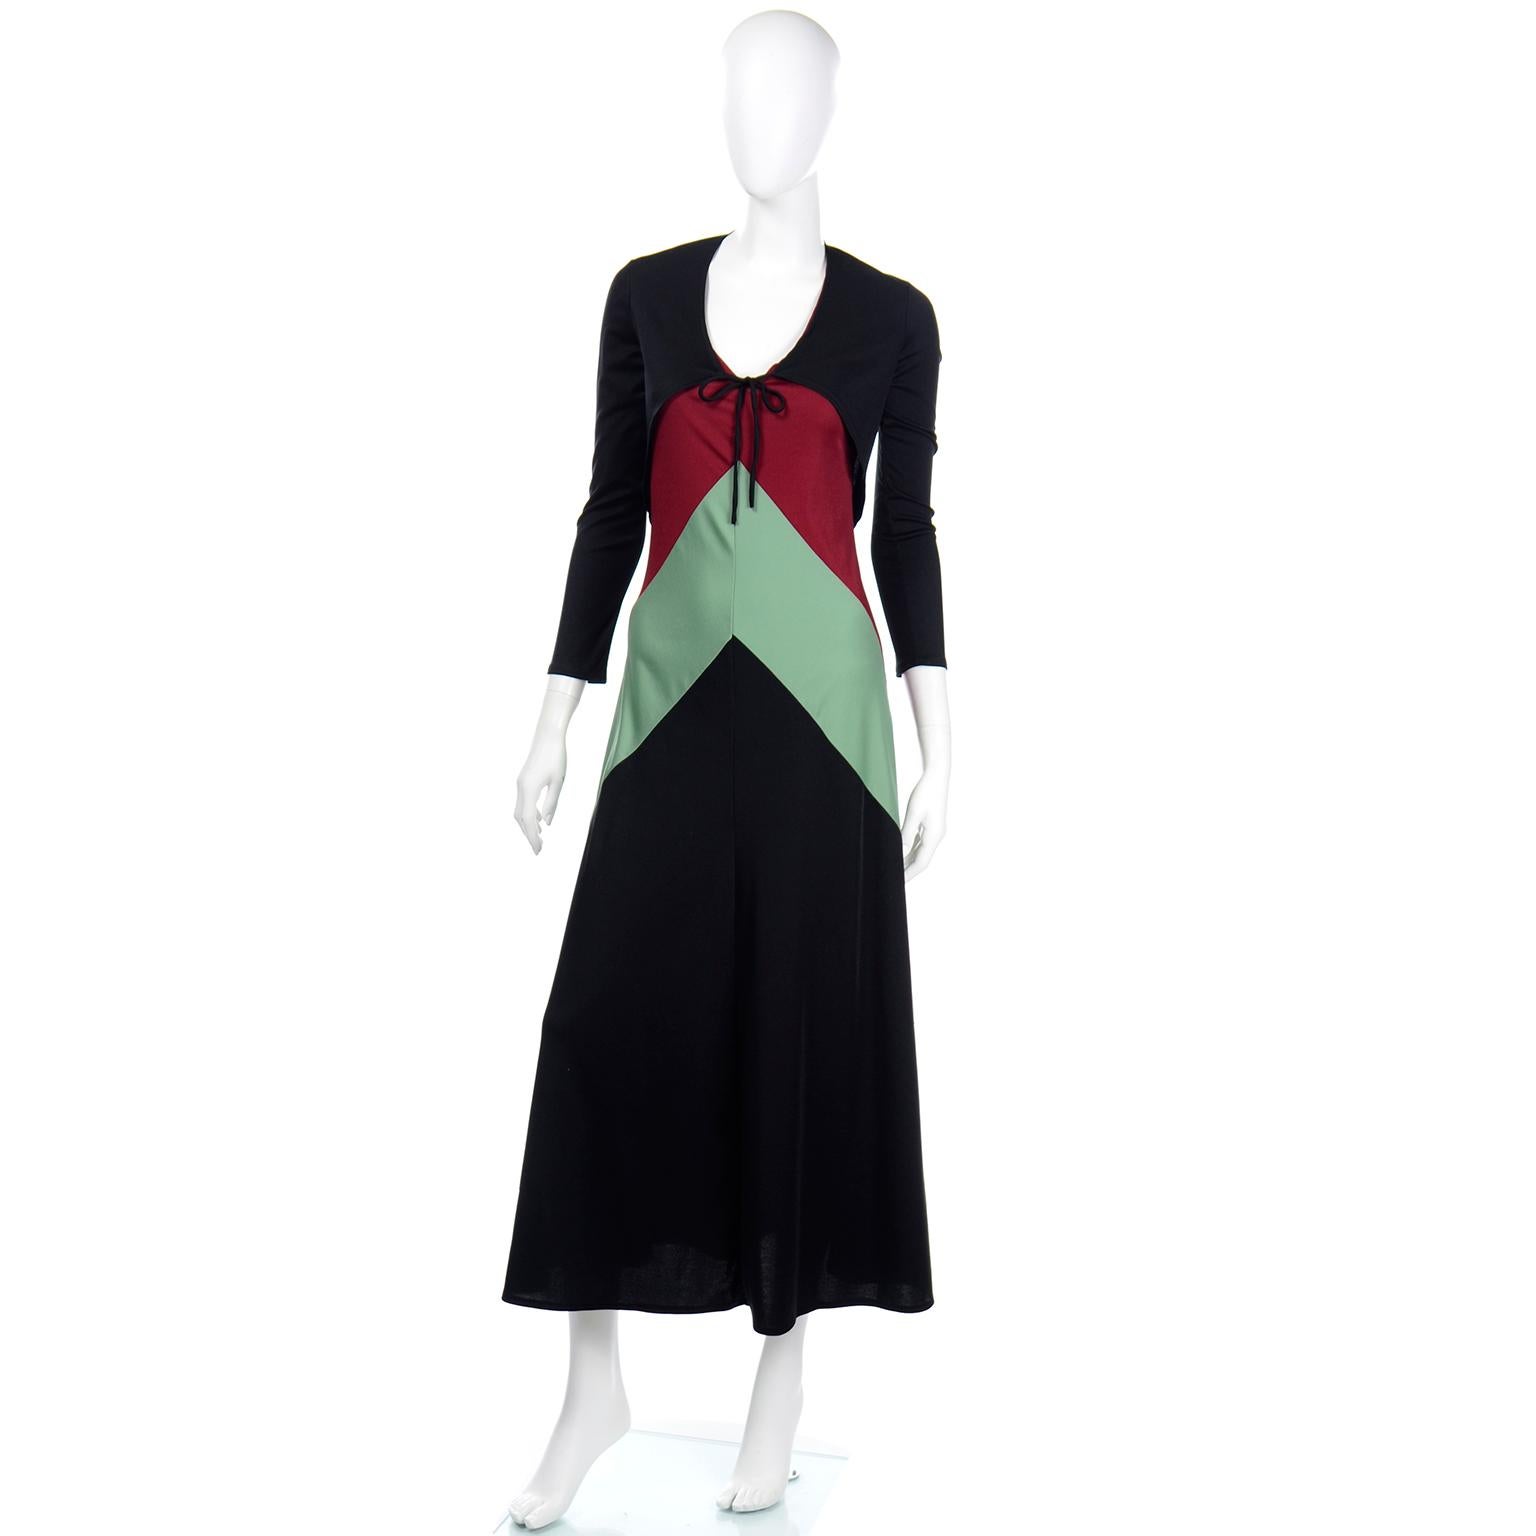 This is such a fun 2 piece vintage jersey maxi tank dress from the 1970's with a coordinating black stretch bolero jacket. The dress is in a black jersey with pretty inverted V color blocking in shades of rusty red, sage green and black. The little